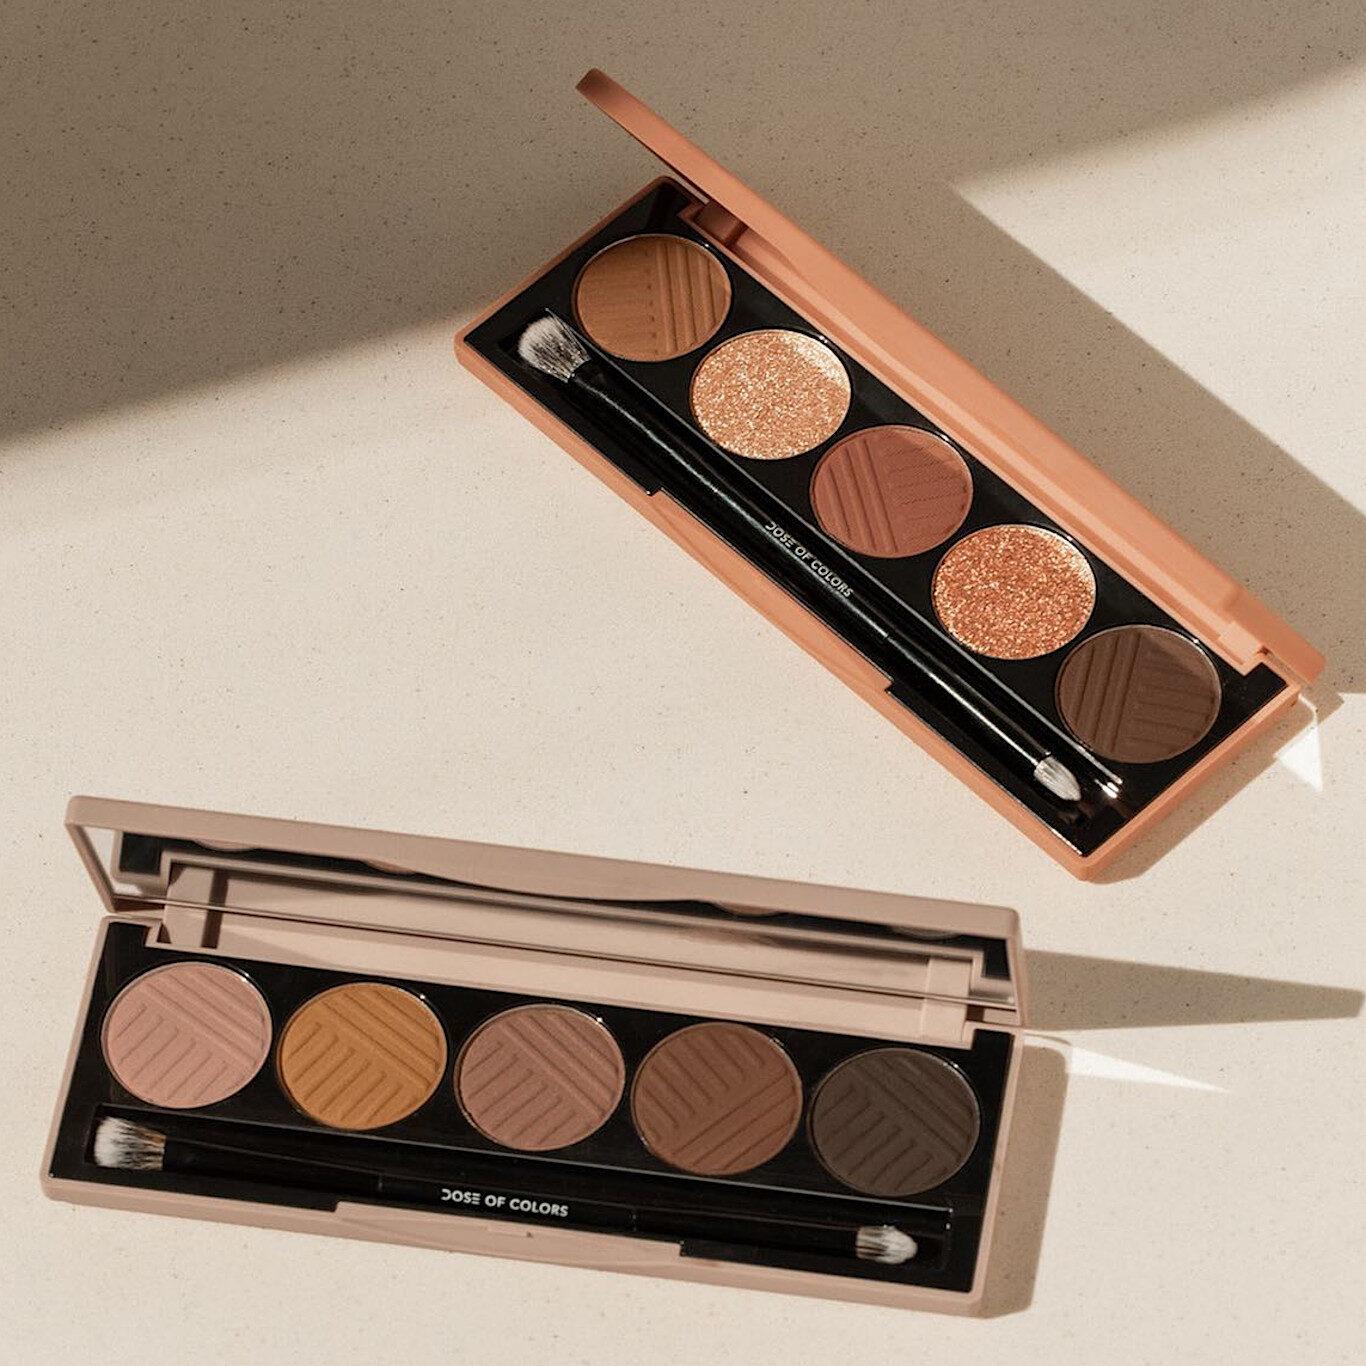 Dose Of Colors Baked Browns II & Golden Hour Eyeshadow Palettes Post Cover